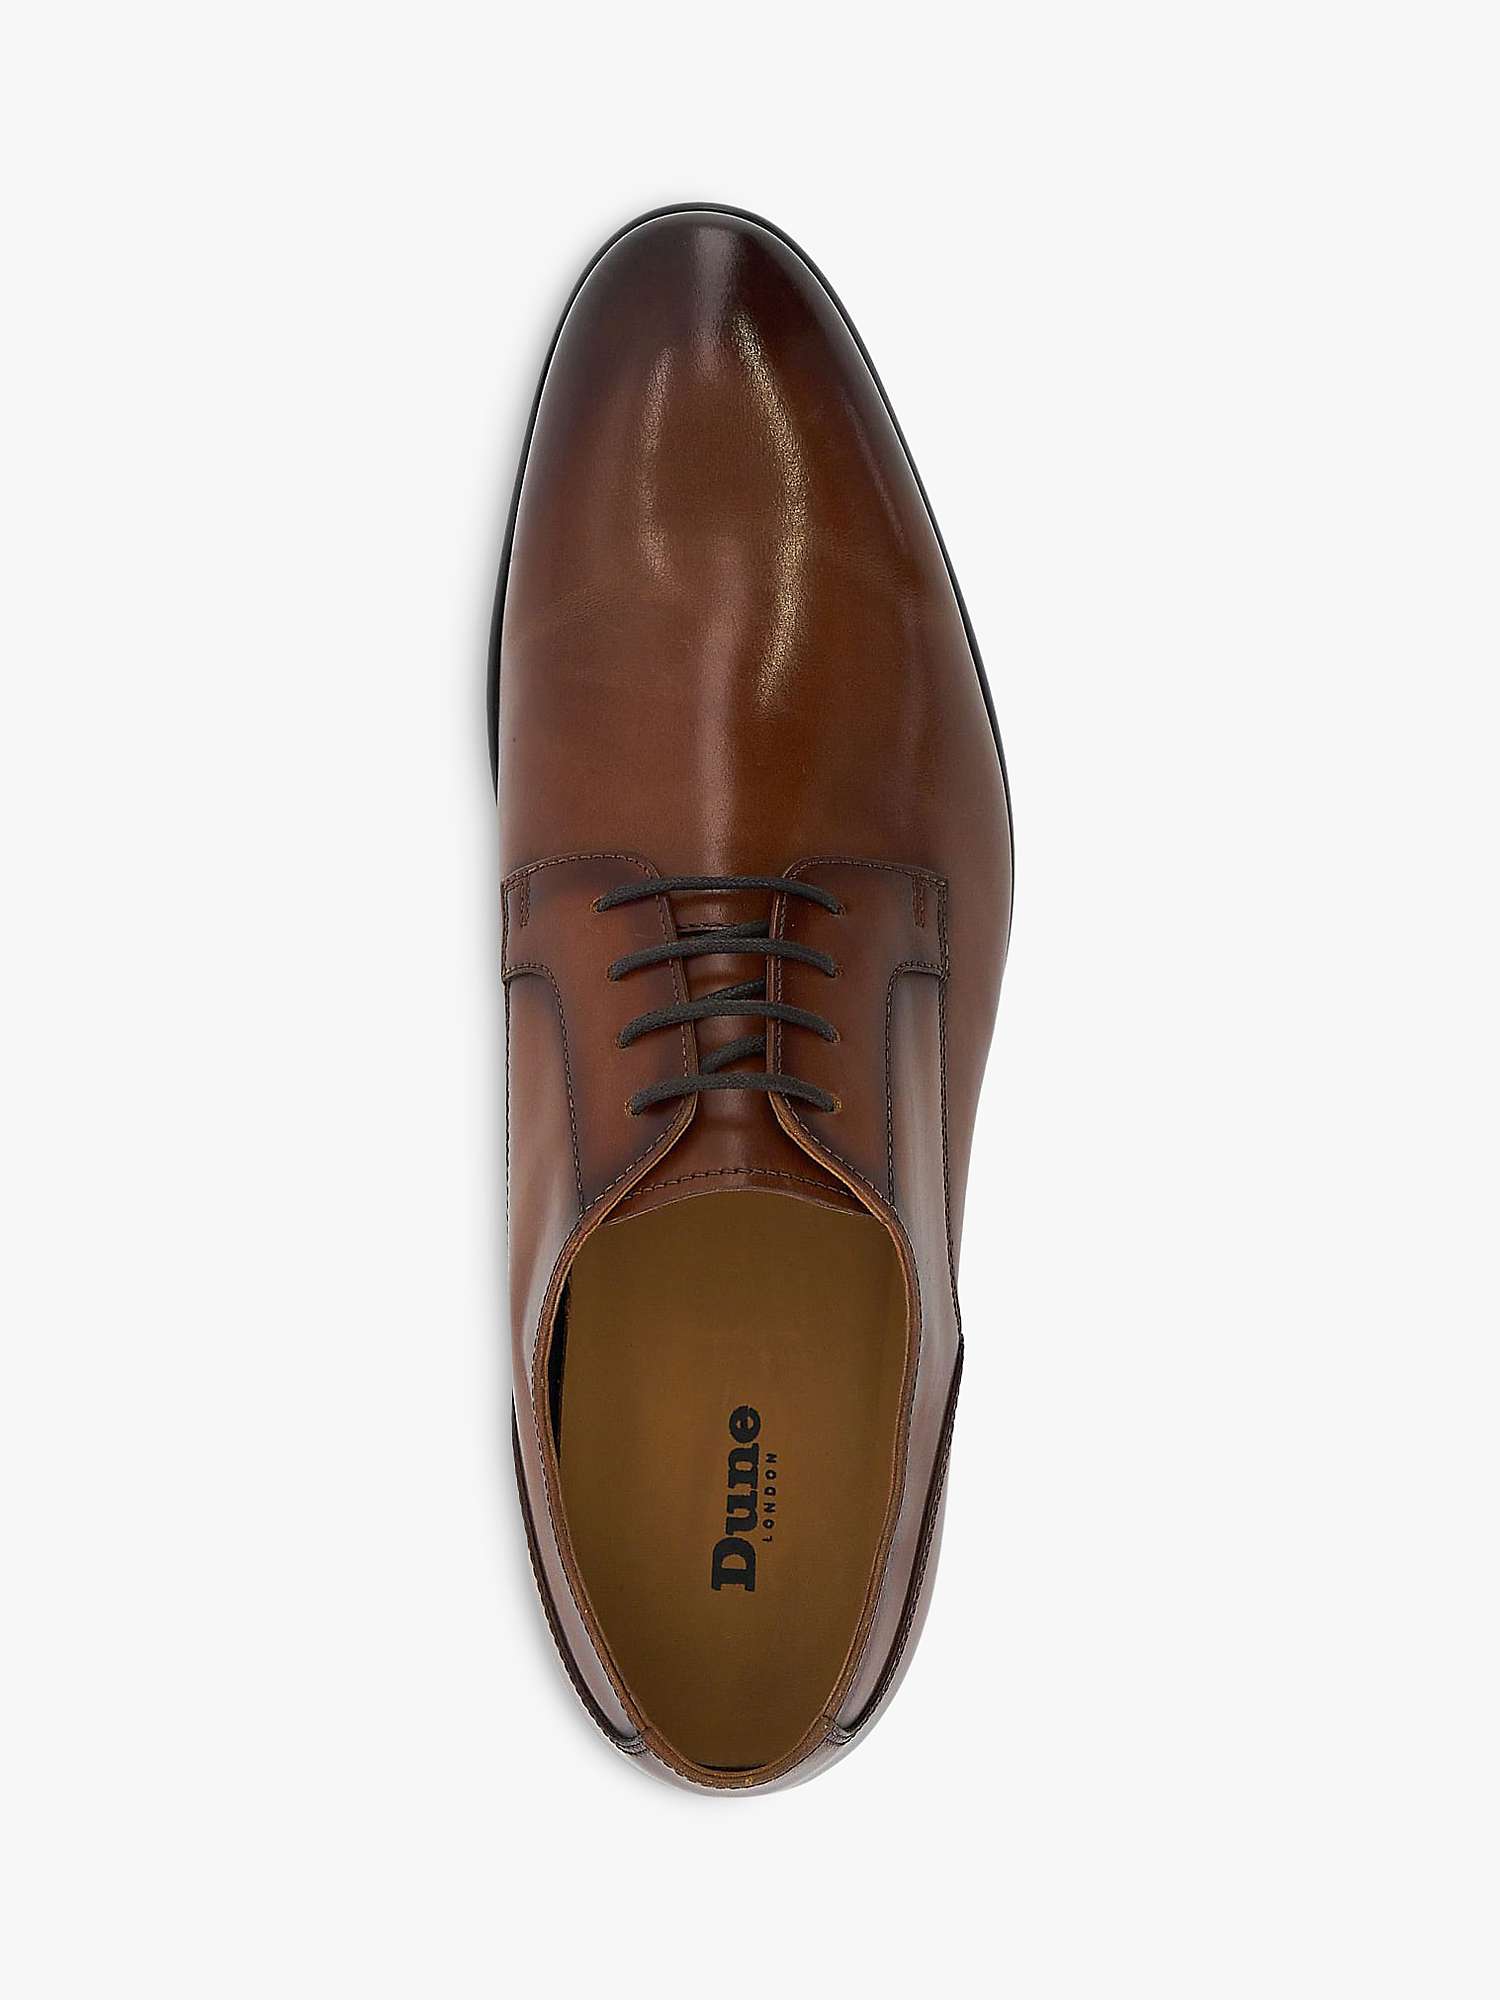 Buy Dune Southwark Leather Lace Up Shoes Online at johnlewis.com